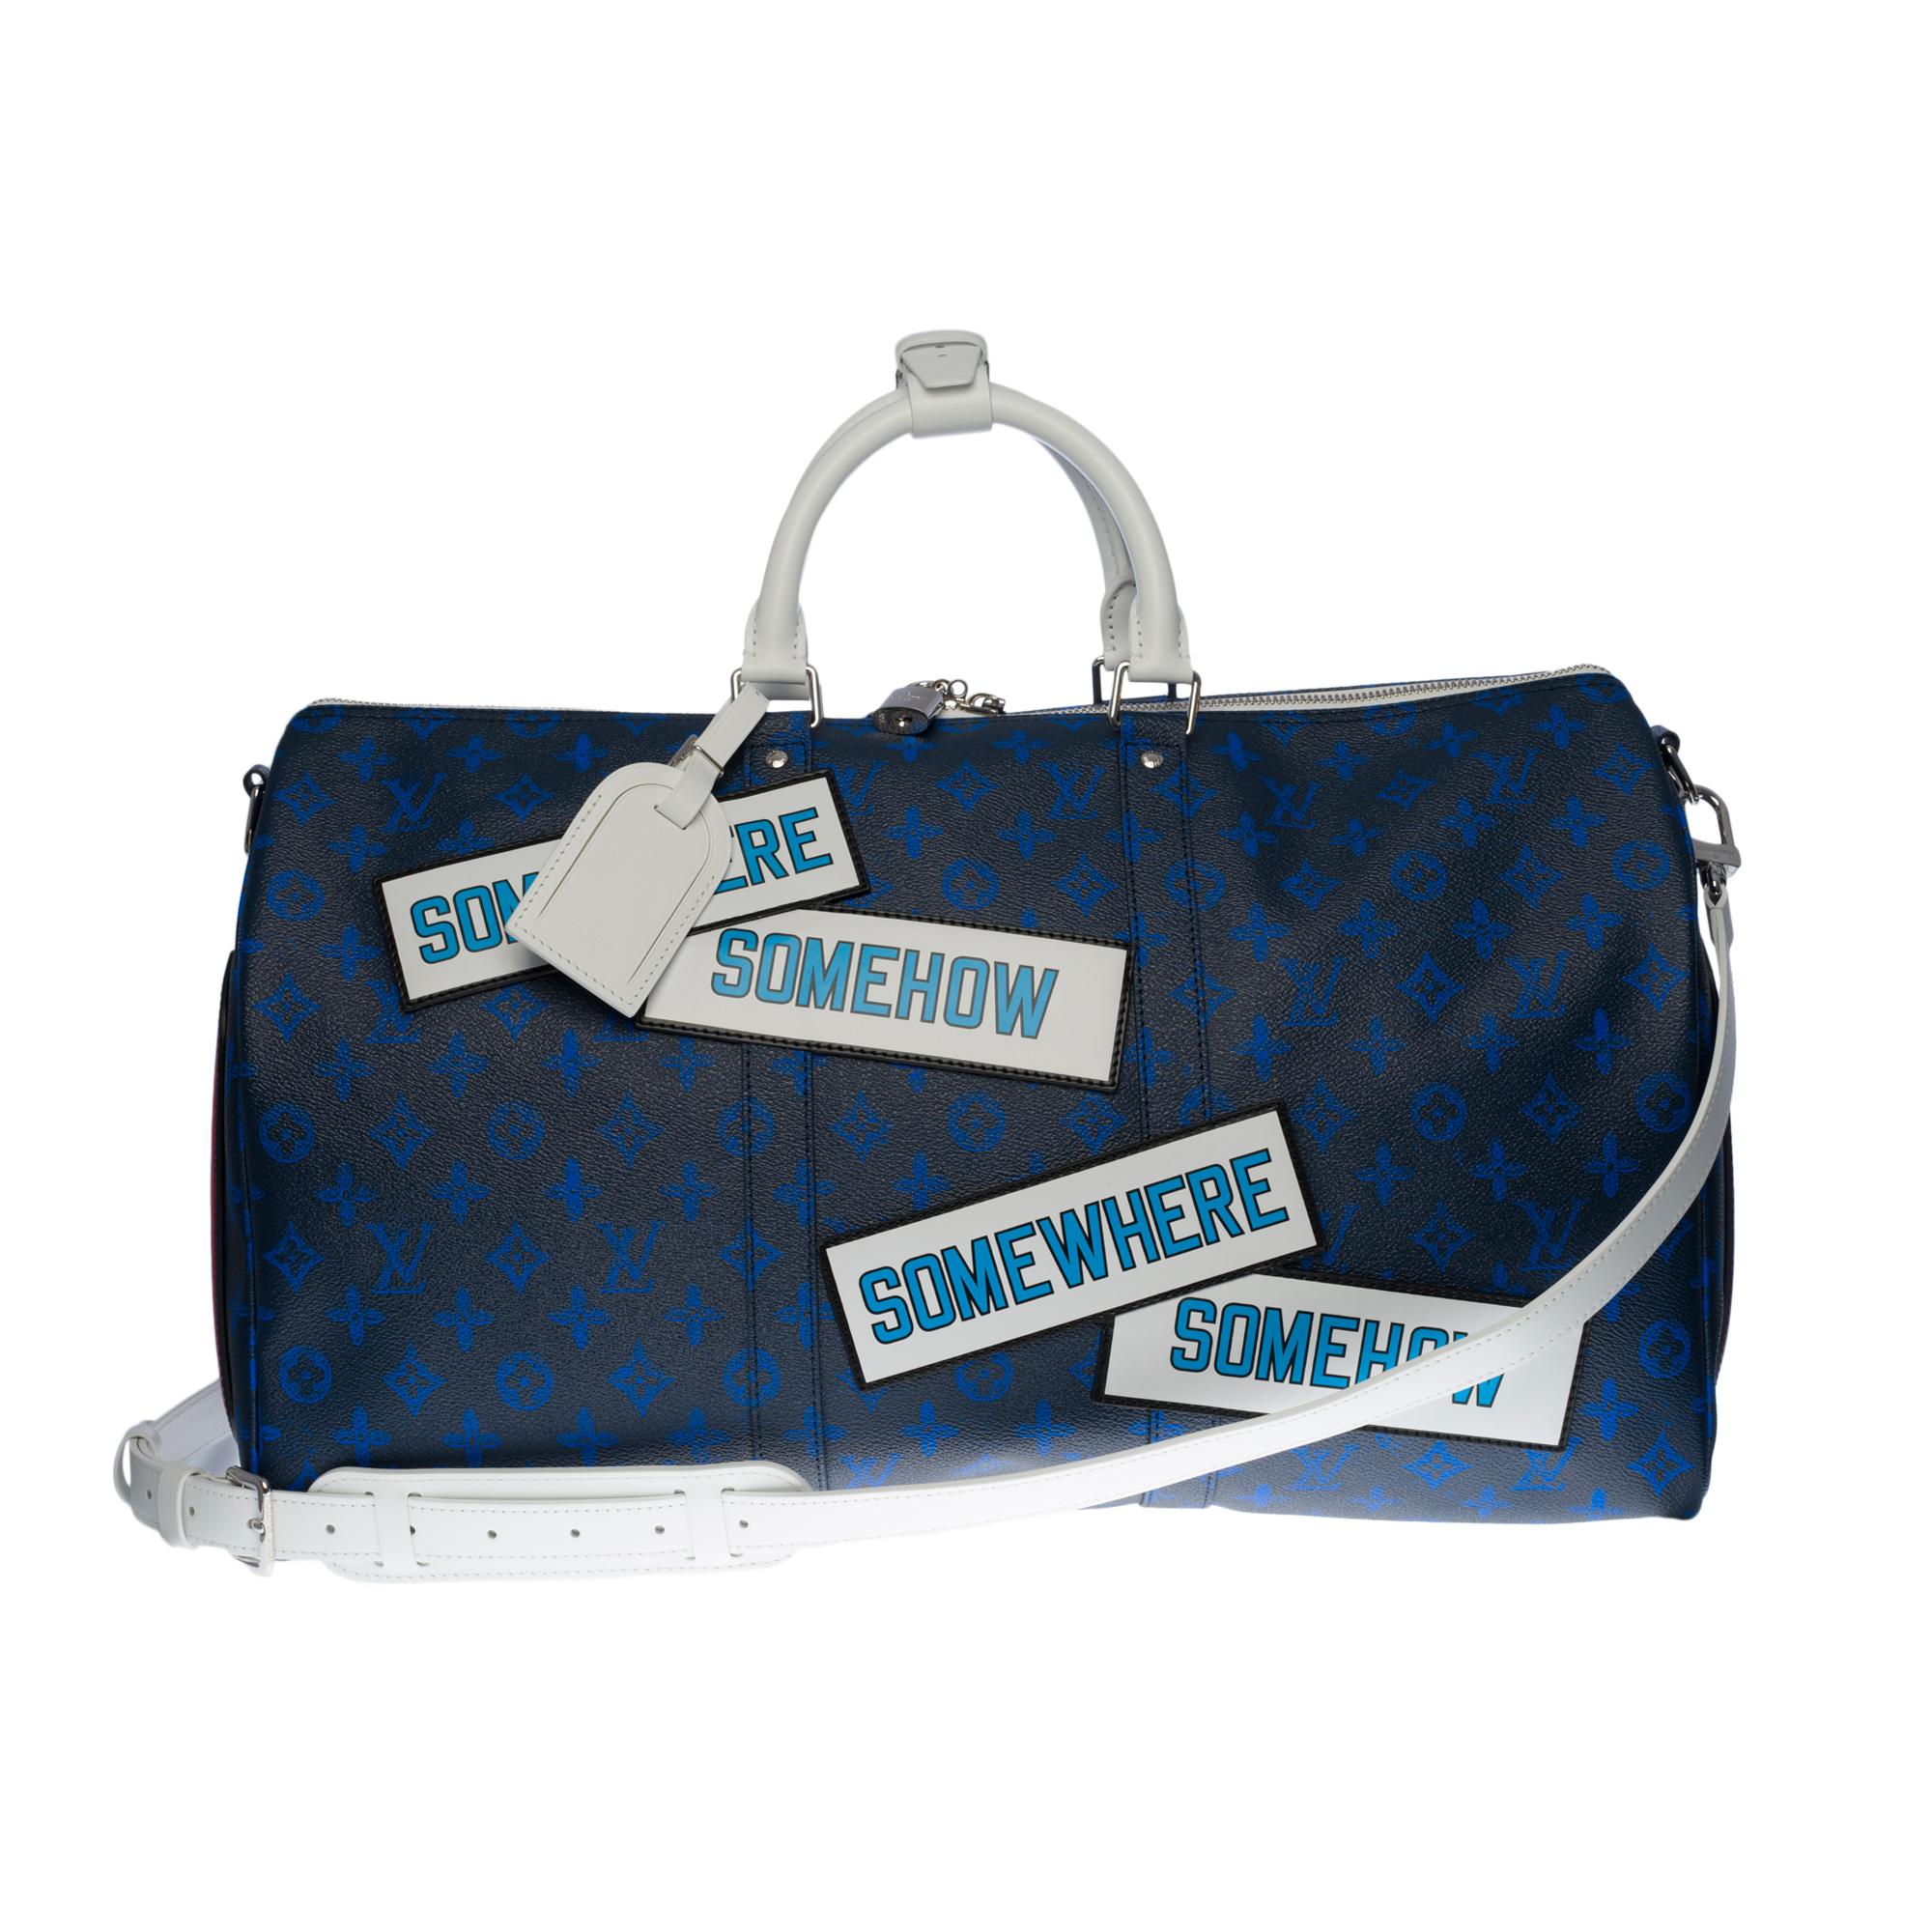 ULTRA EXCLUSIVE - SOLD OUT - Fashion Week 2021

Part of Virgil Abloh’s collaboration with American artist Lawrence Weiner, the Keepall Bandouliere 50 is made from Vintage Monogram canvas and feature’s Weiner’s celebrated aphorism “Somewhere